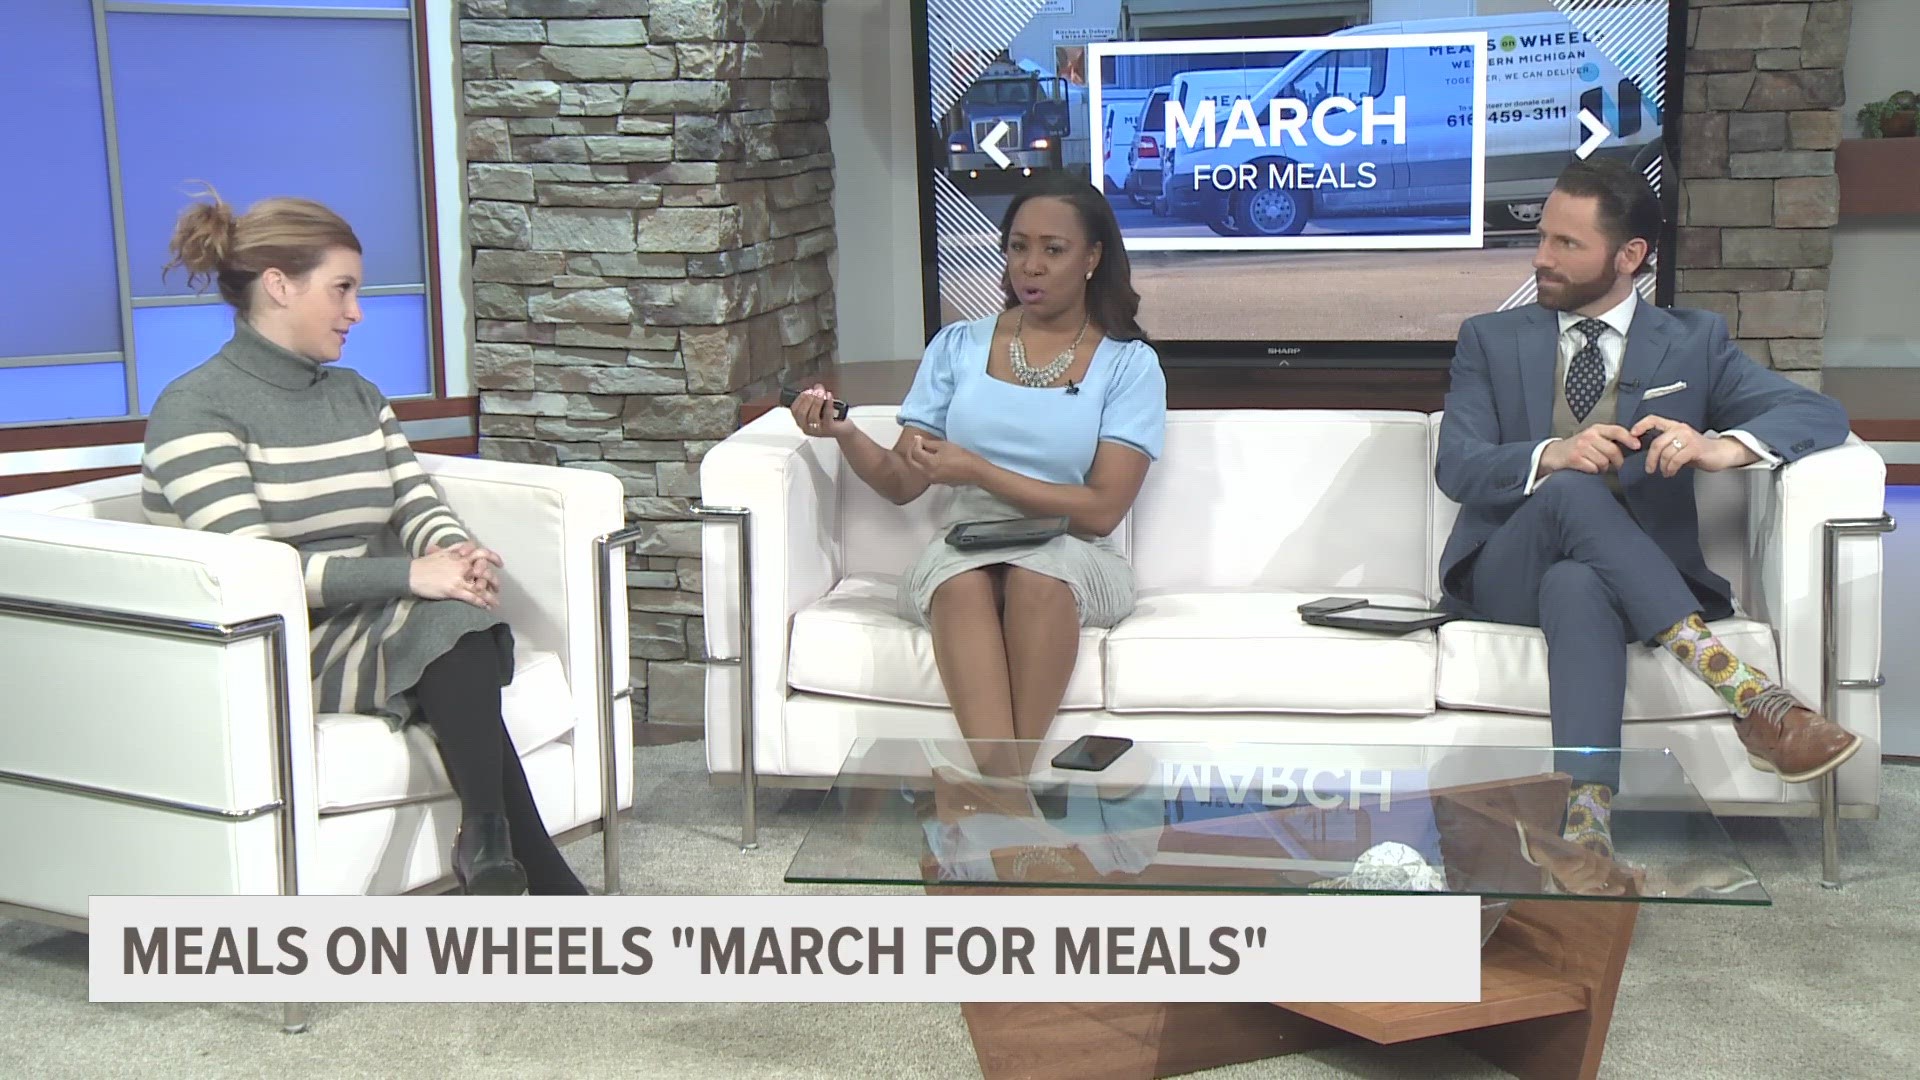 March for Meals celebrates the work Meals on Wheels does across the country, and gives people opportunities to volunteer and learn more.